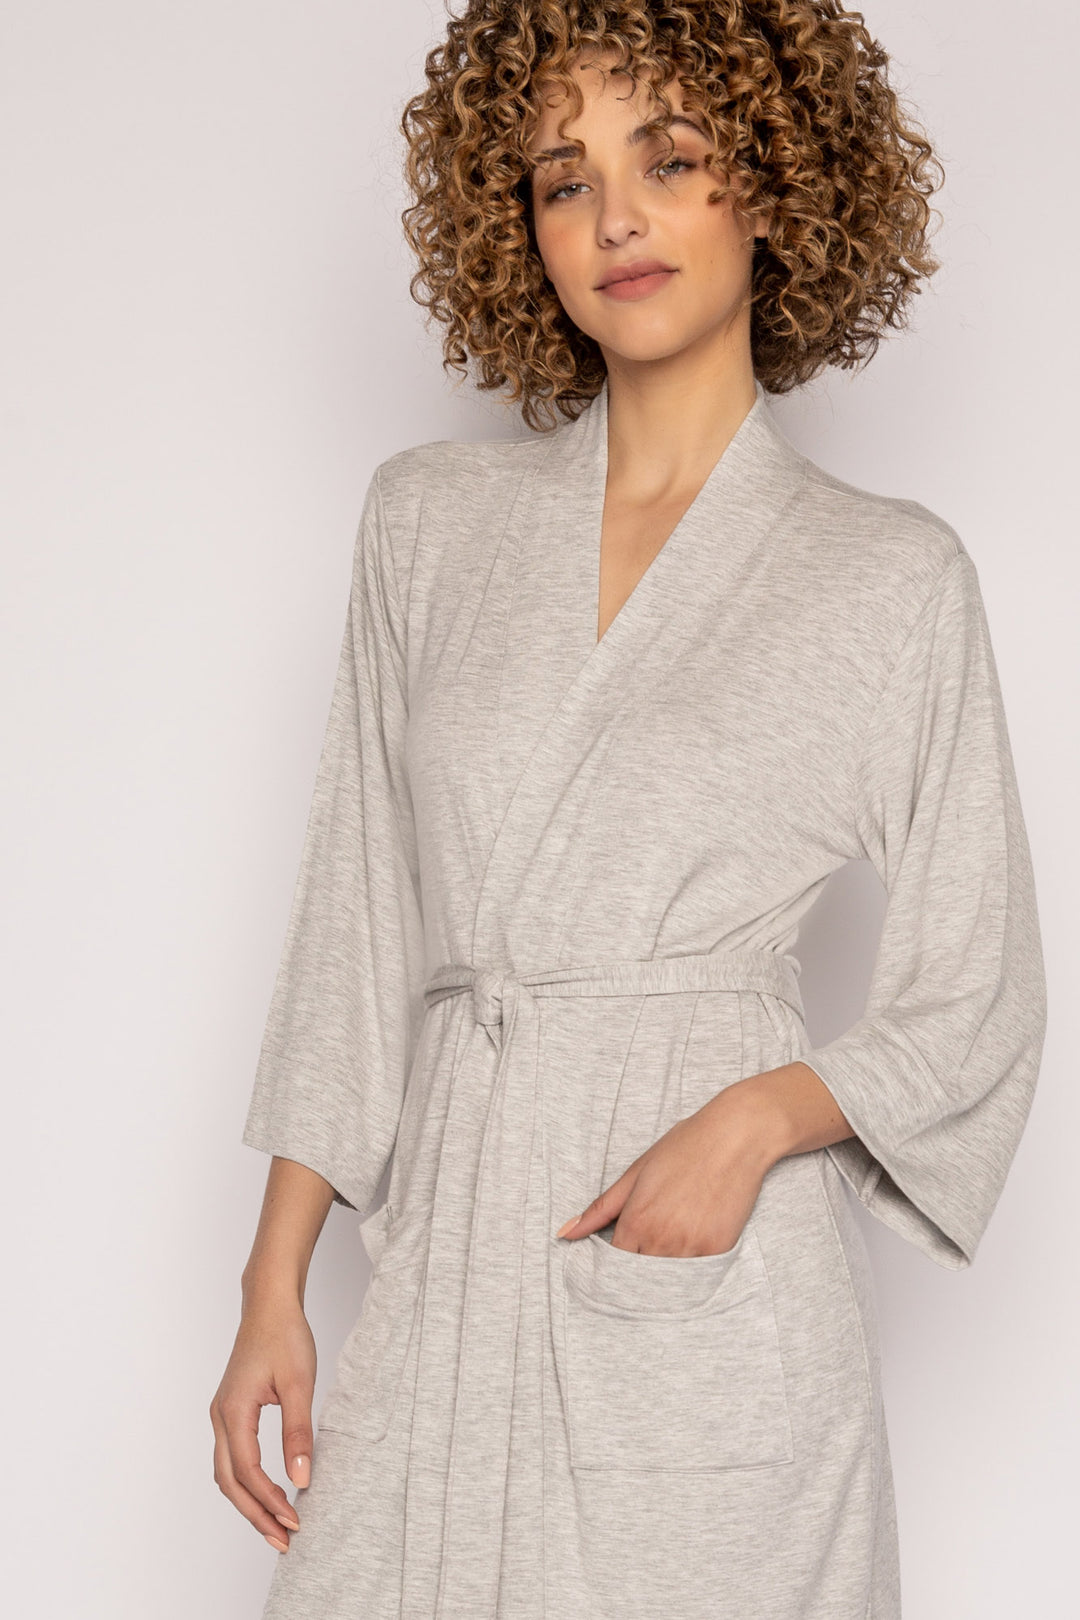 Light grey kimono-style robe with side patch pockets & self belt in mini French terry. Mid-length fit. (7122608455780)